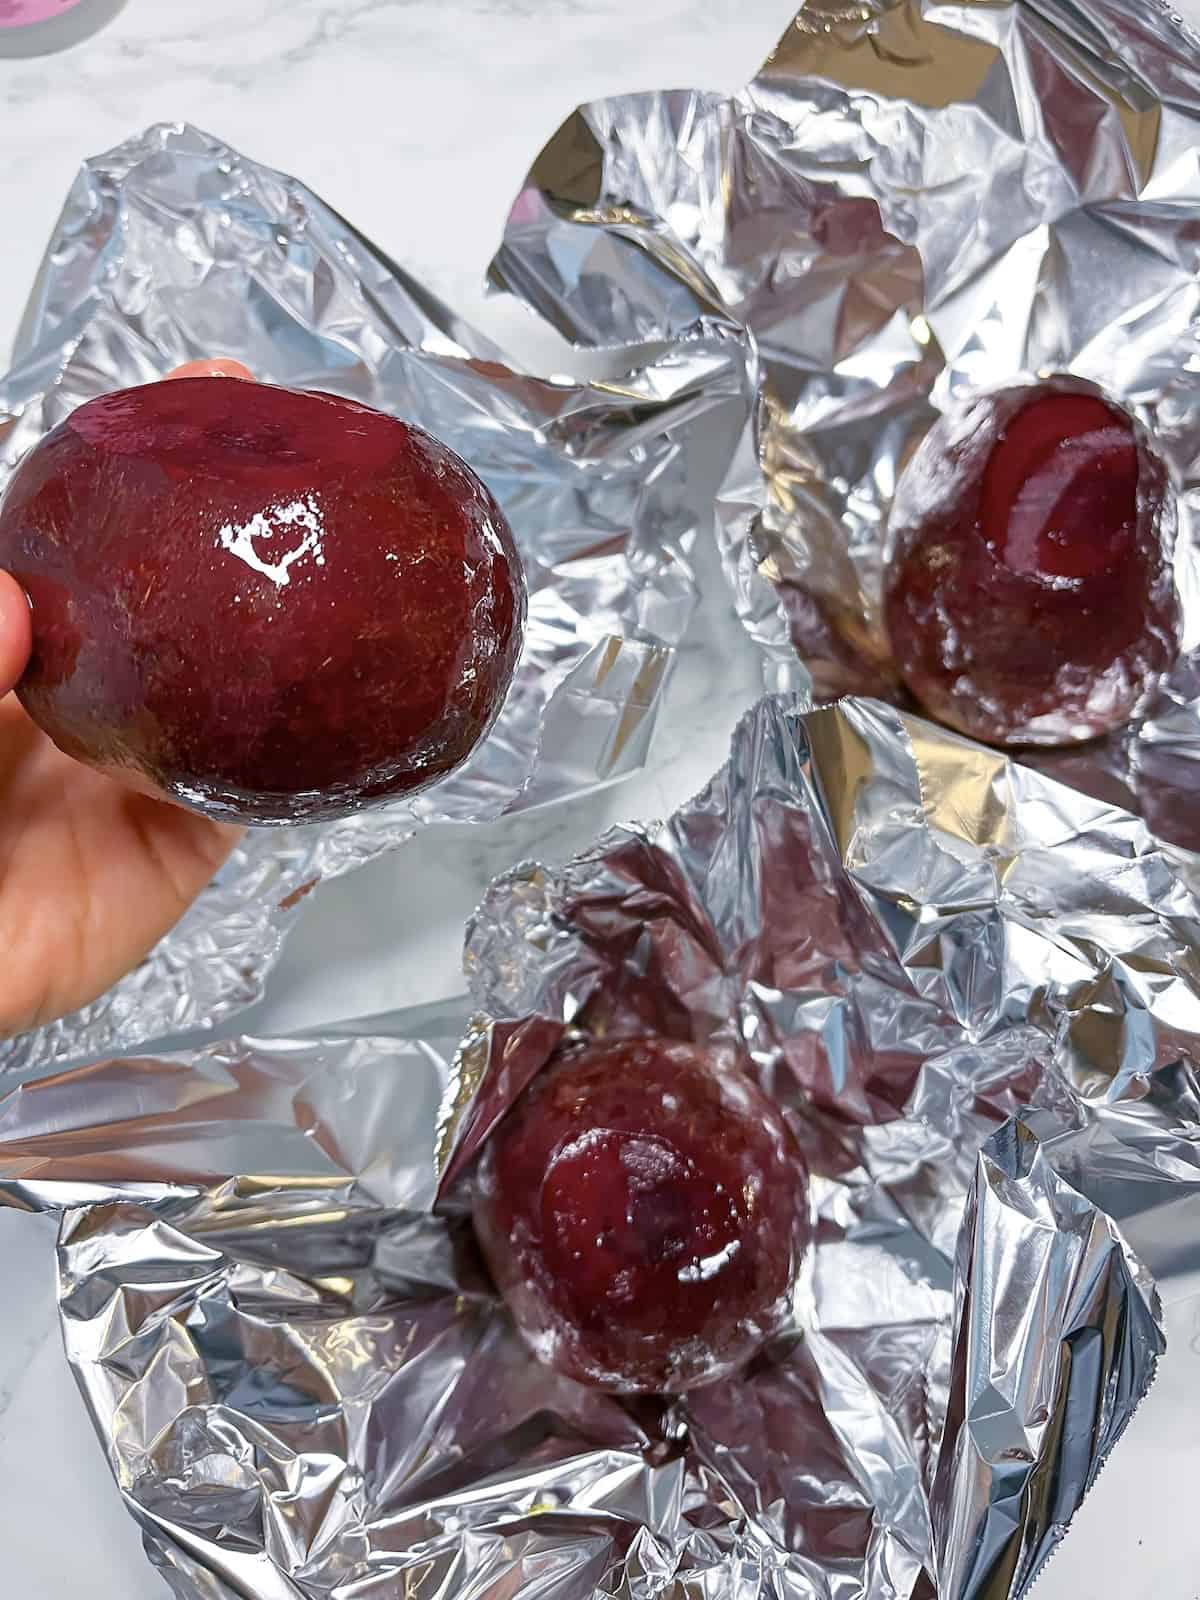 Raw beets coated in olive oil and being put in a foil packet to be roasted. A hand is holding one of them up